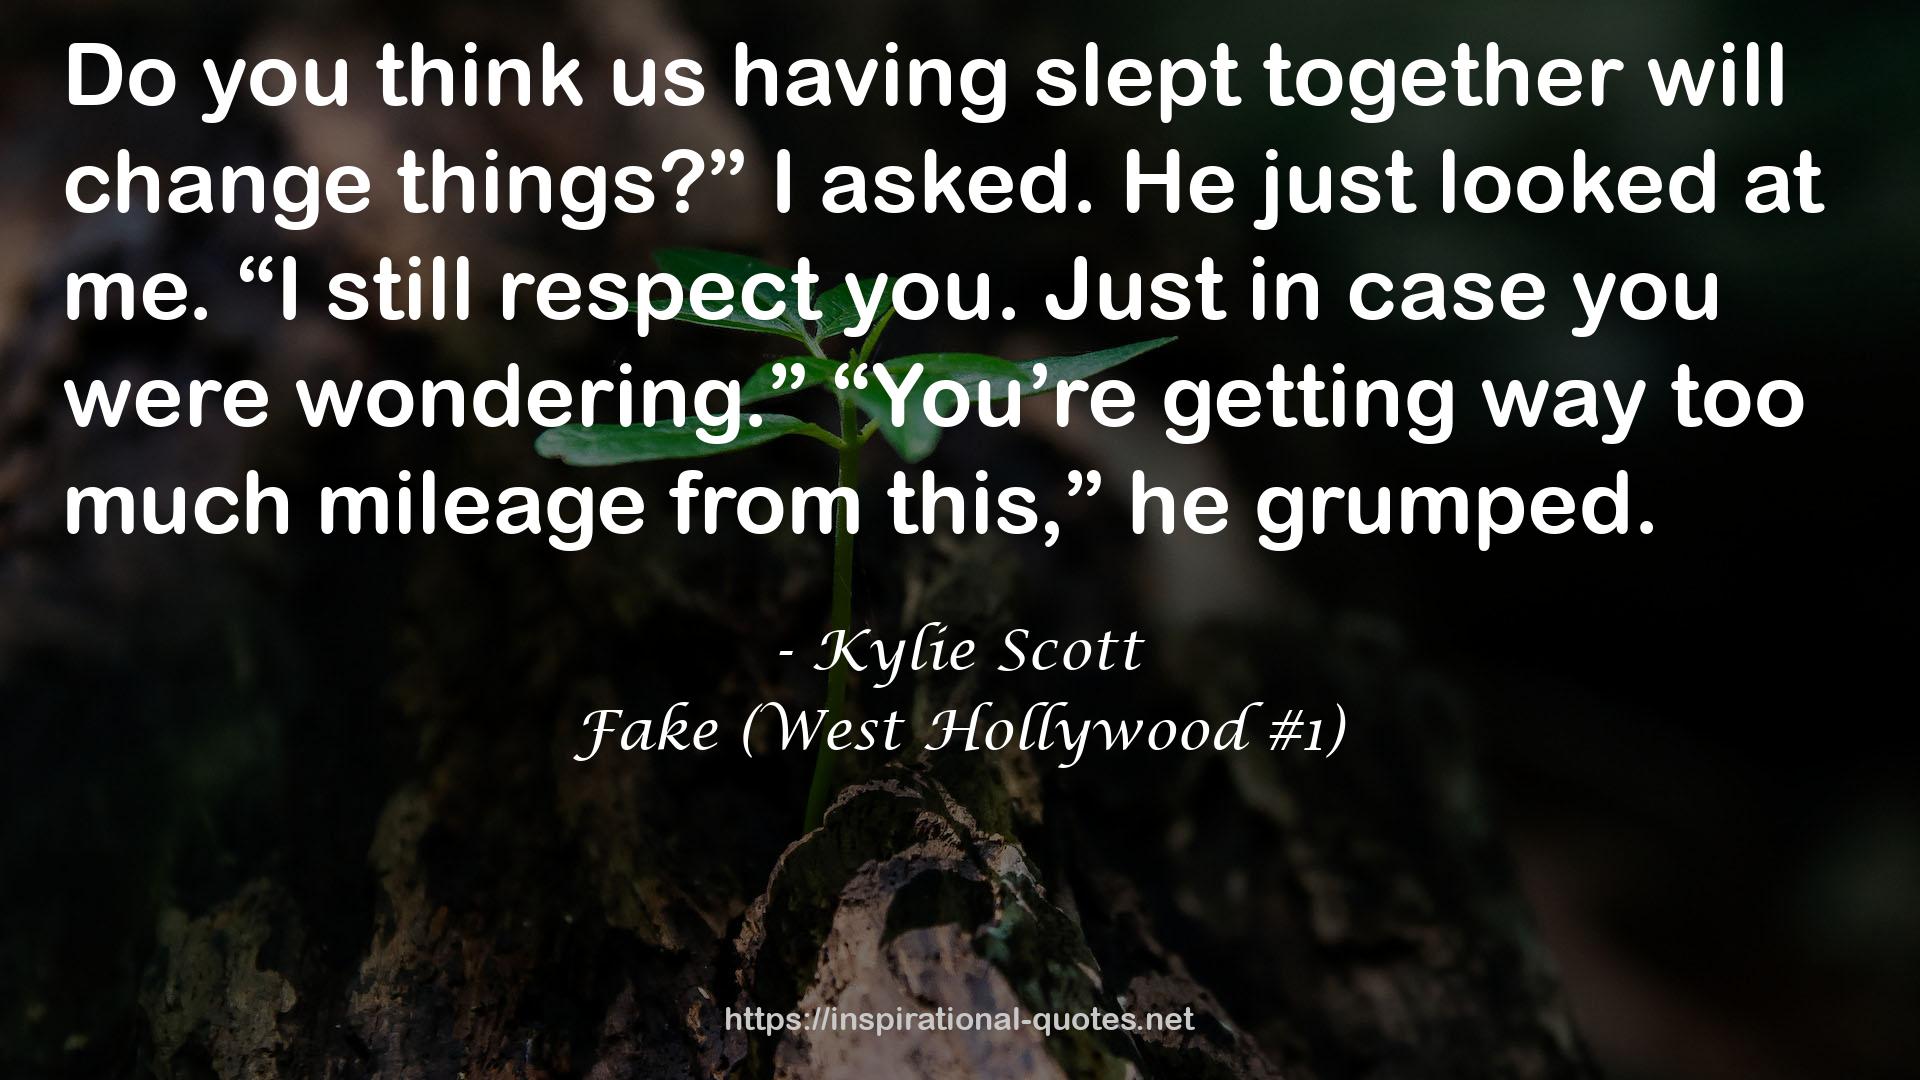 Fake (West Hollywood #1) QUOTES